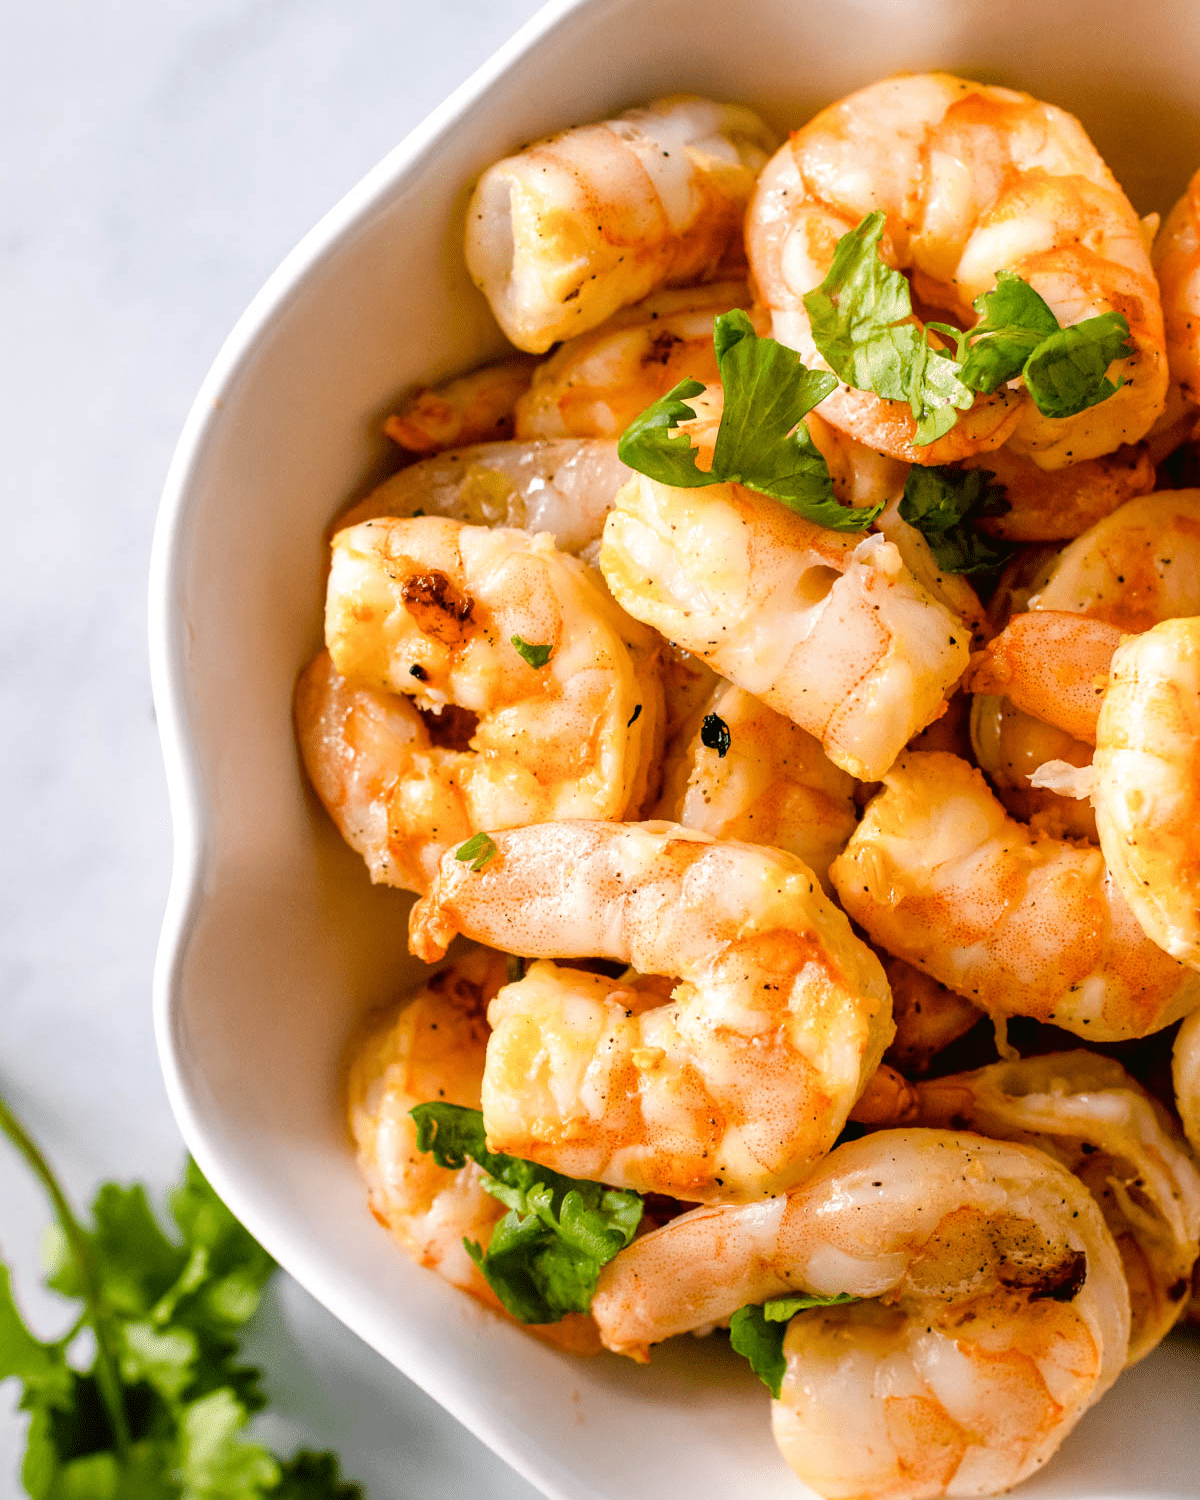 Marinated shrimp in a white bowl